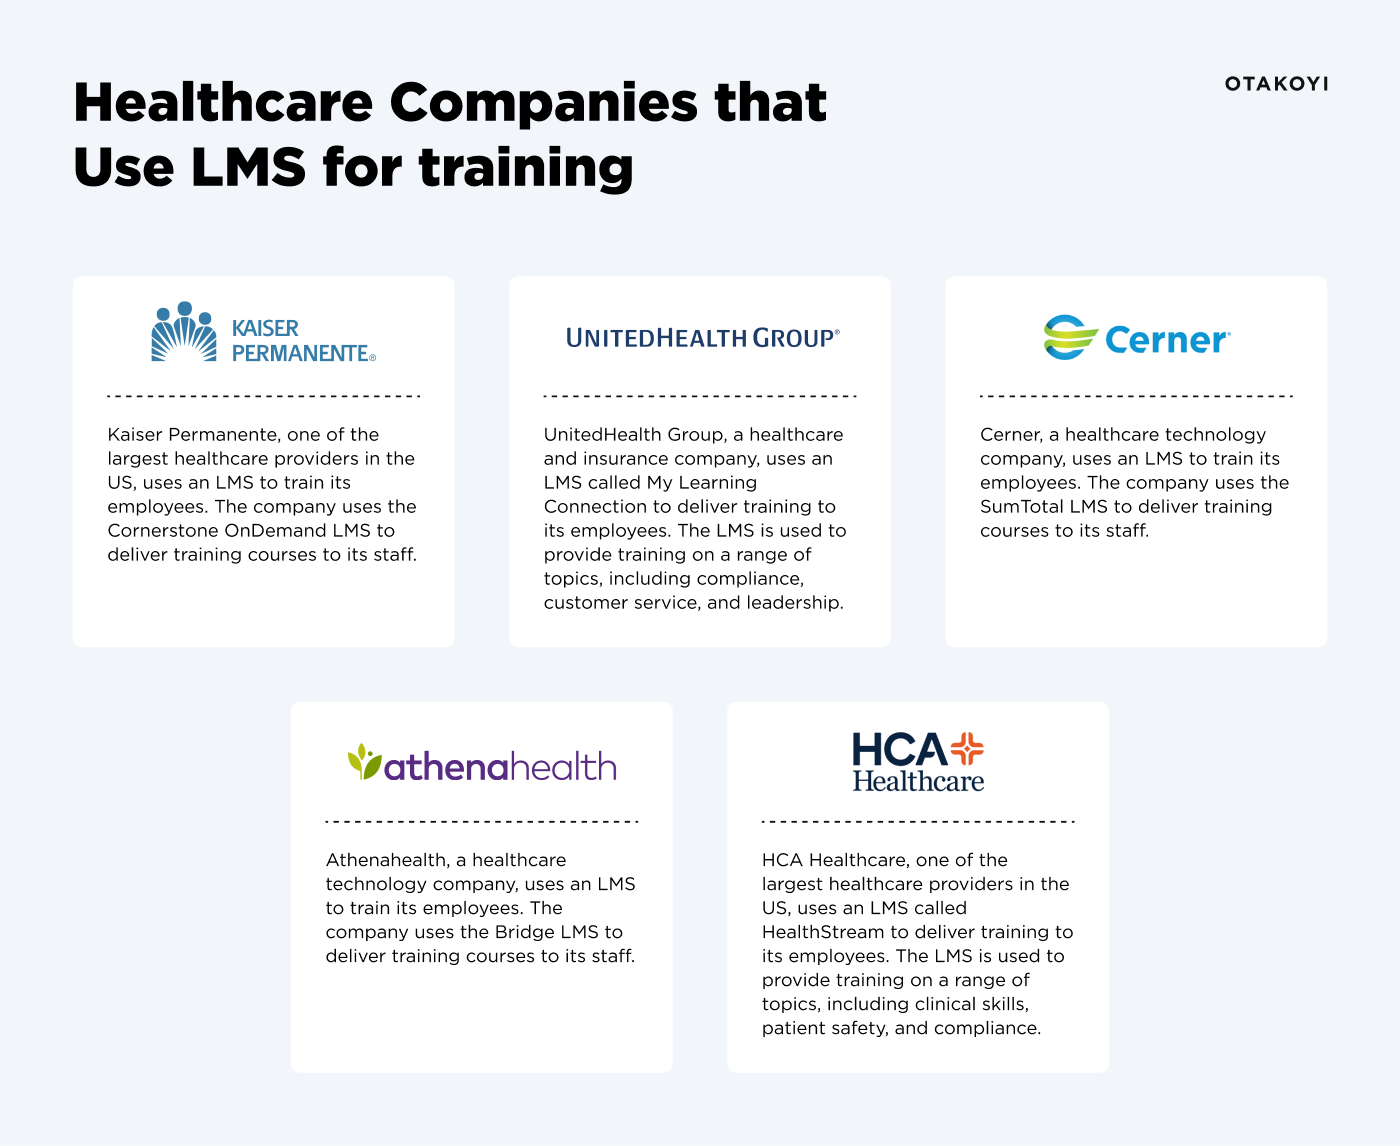 Healthcare companies that use LMS for training